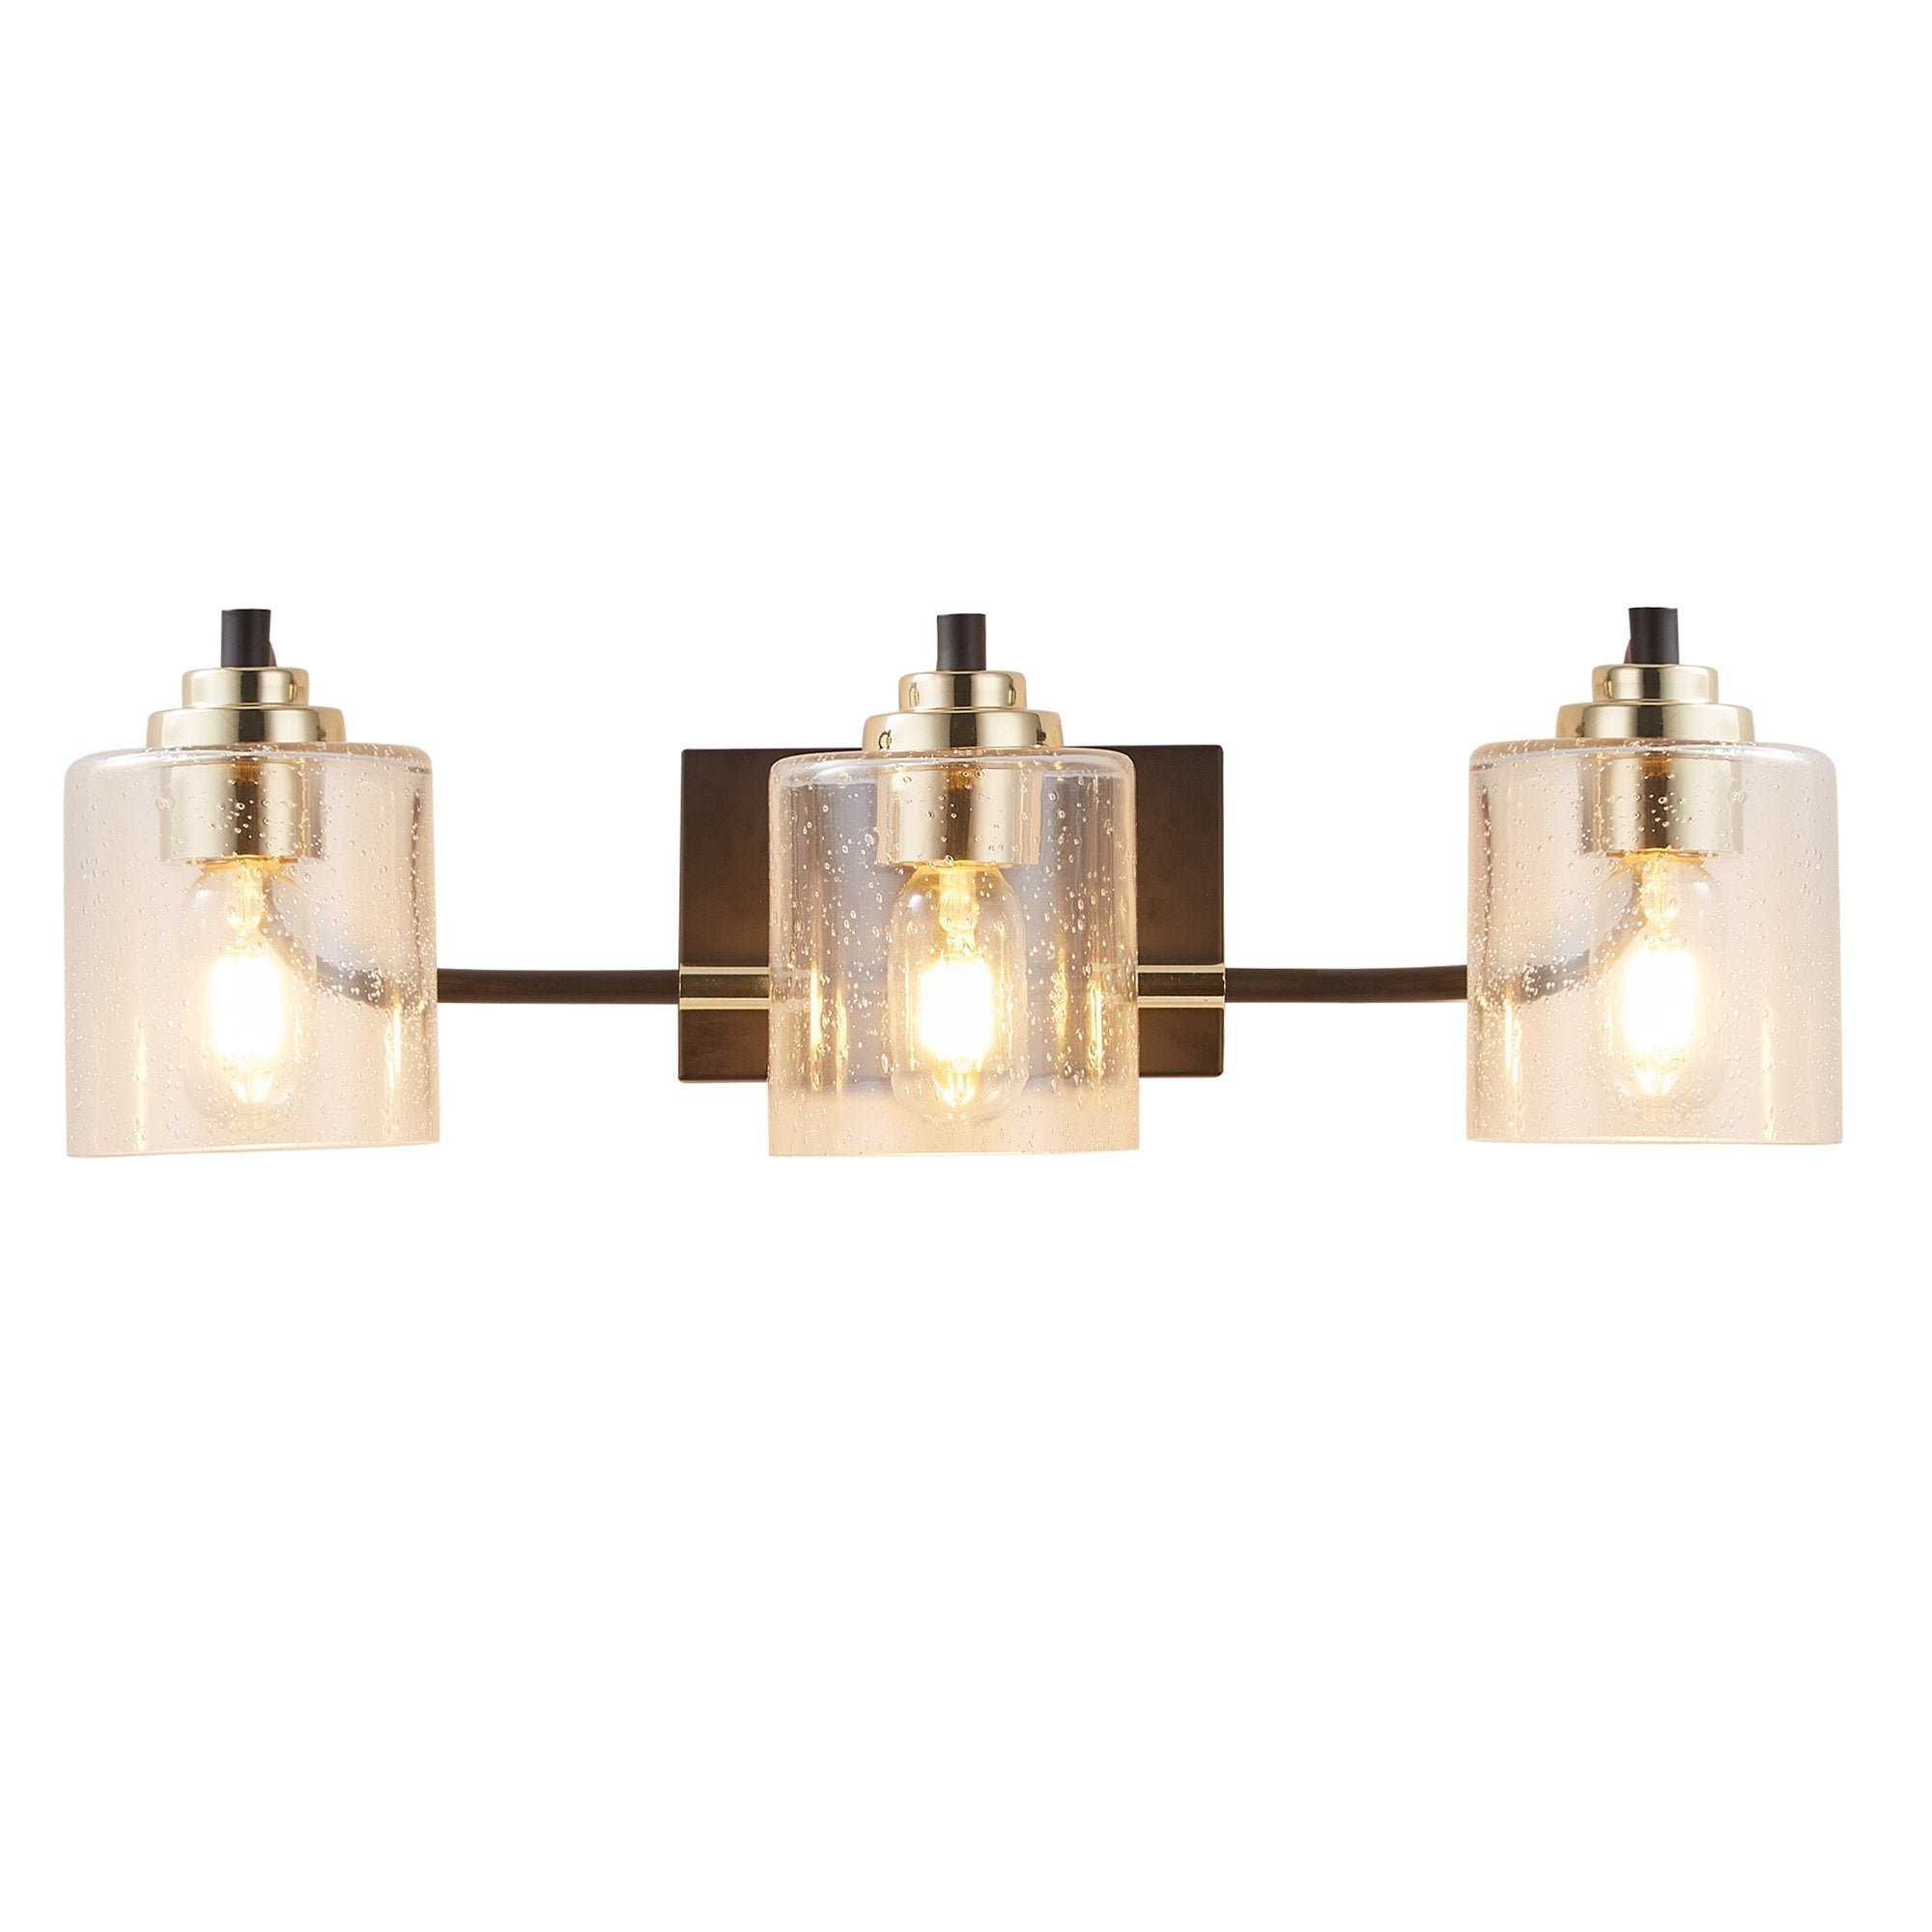 3-Lights Modern Vanity Bathroom Lamp with Bubble Glass Shades Wall Mount Light Fixtures (Exclude Bulb)